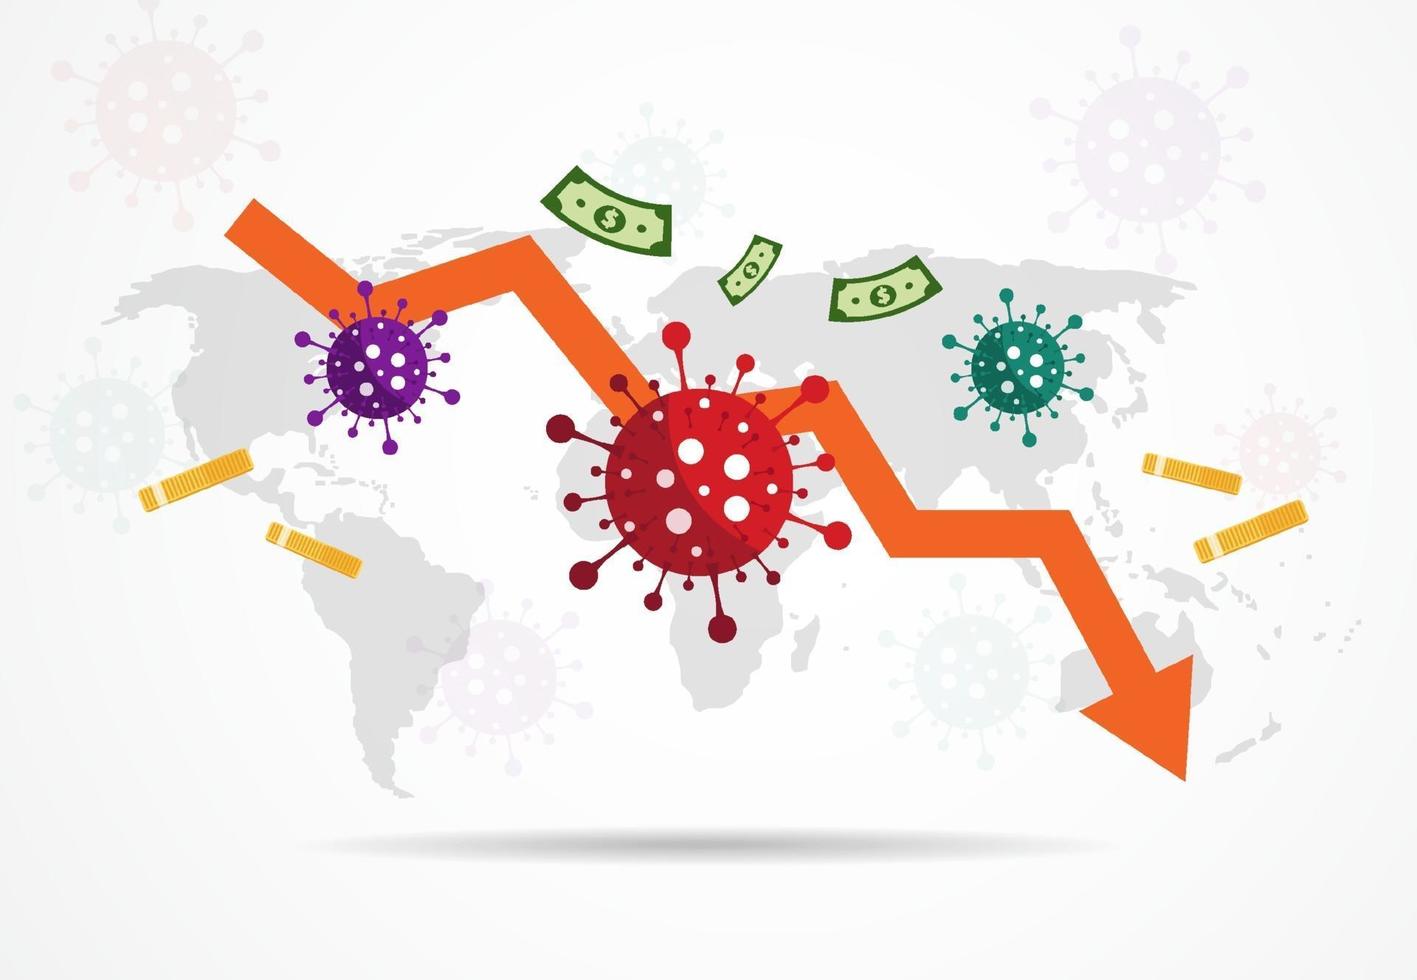 COVID-19 impact on global economy and stock markets, financial crisis concept design. Vector illustration